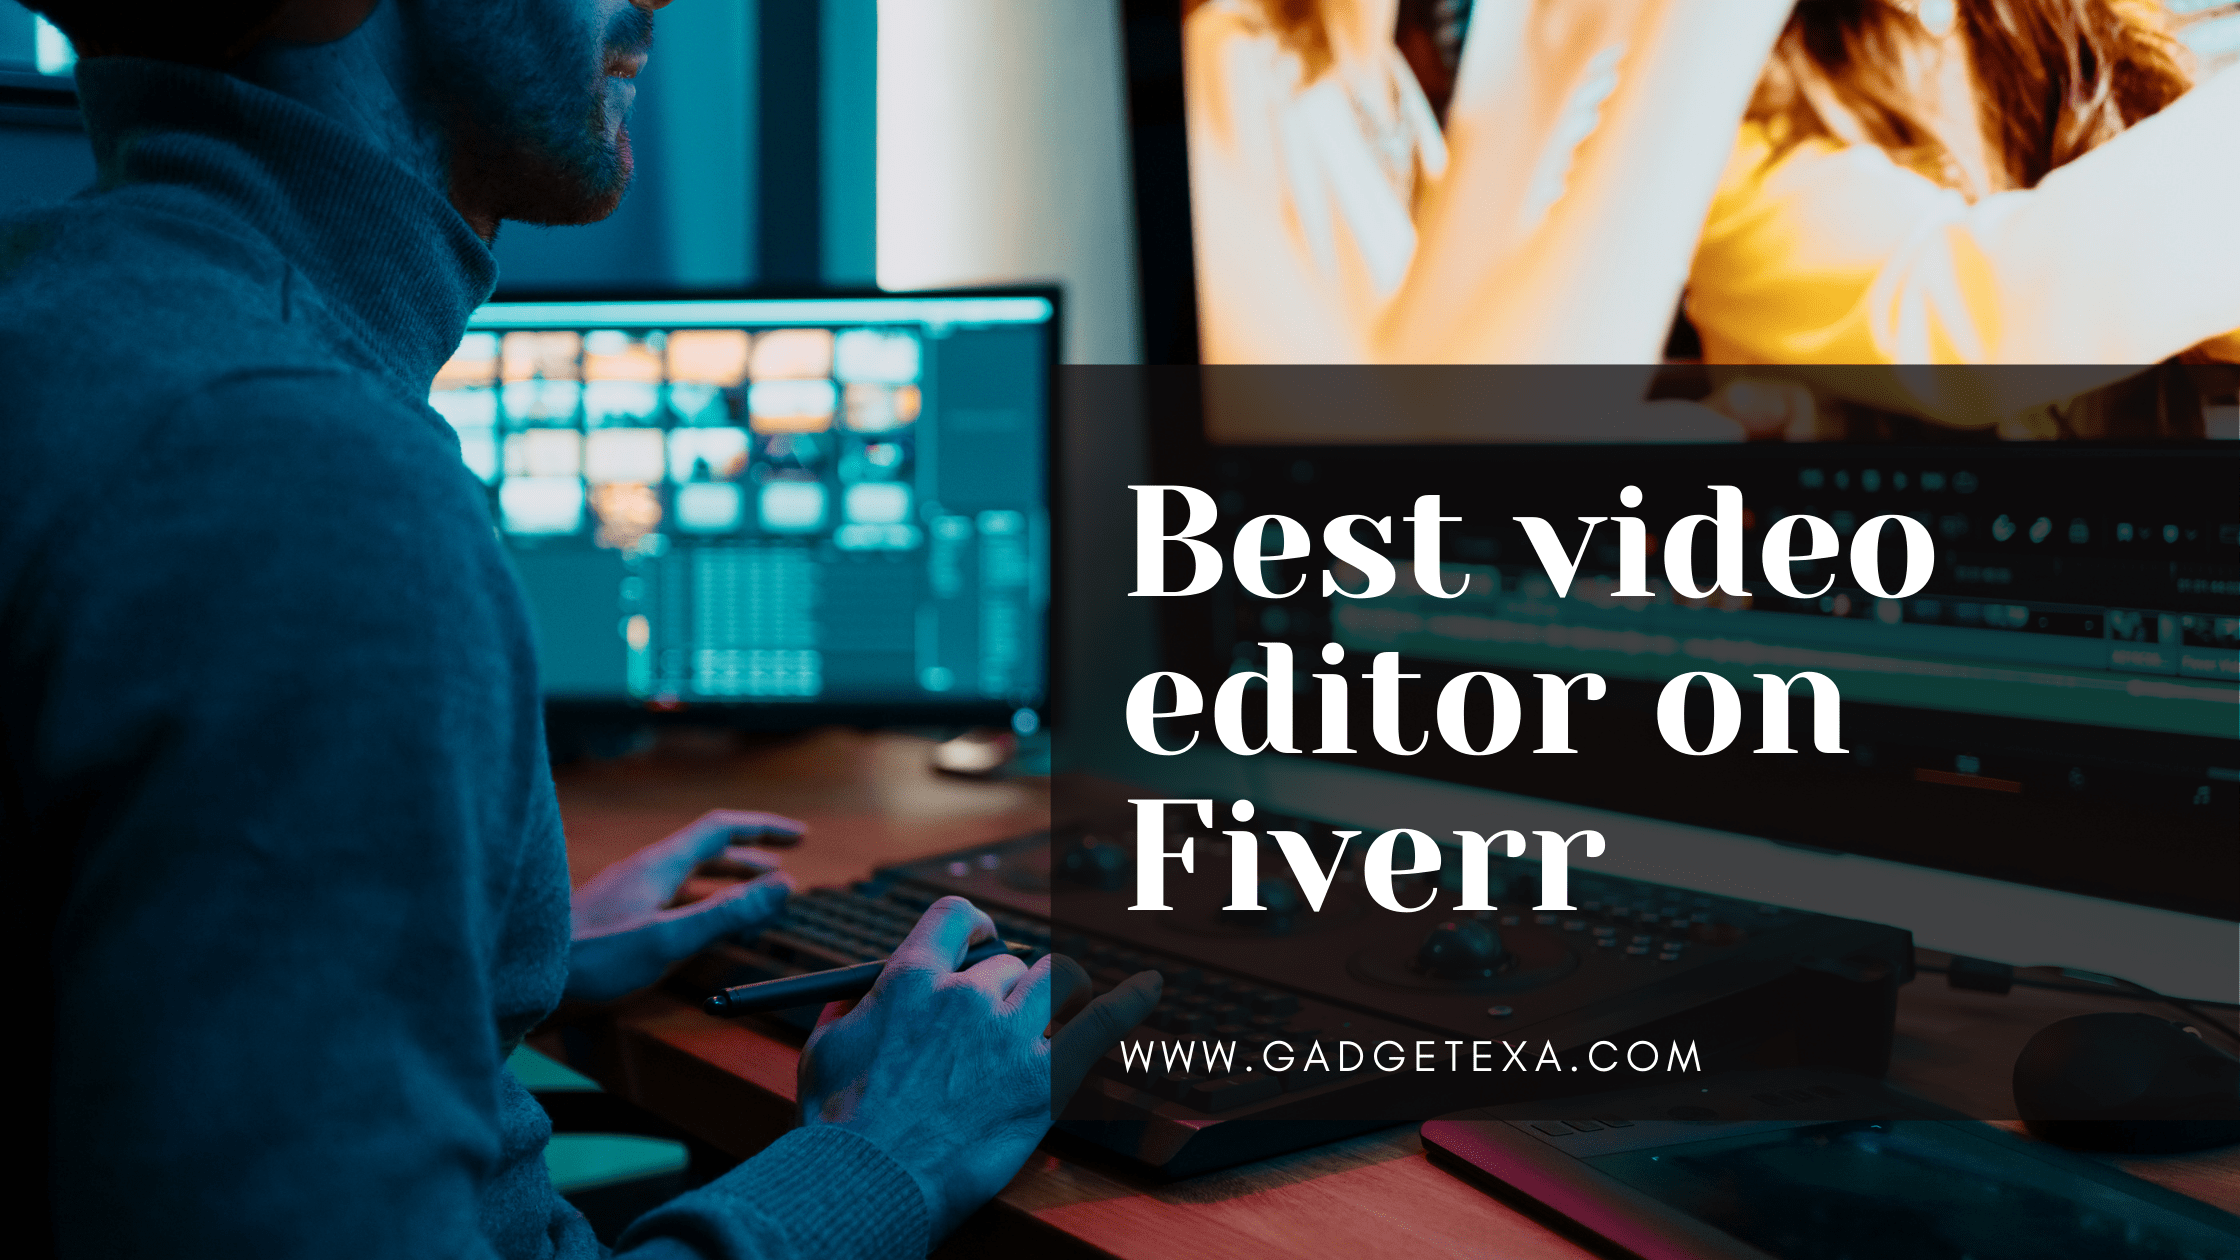 You are currently viewing Best video editor on Fiverr | The latest update